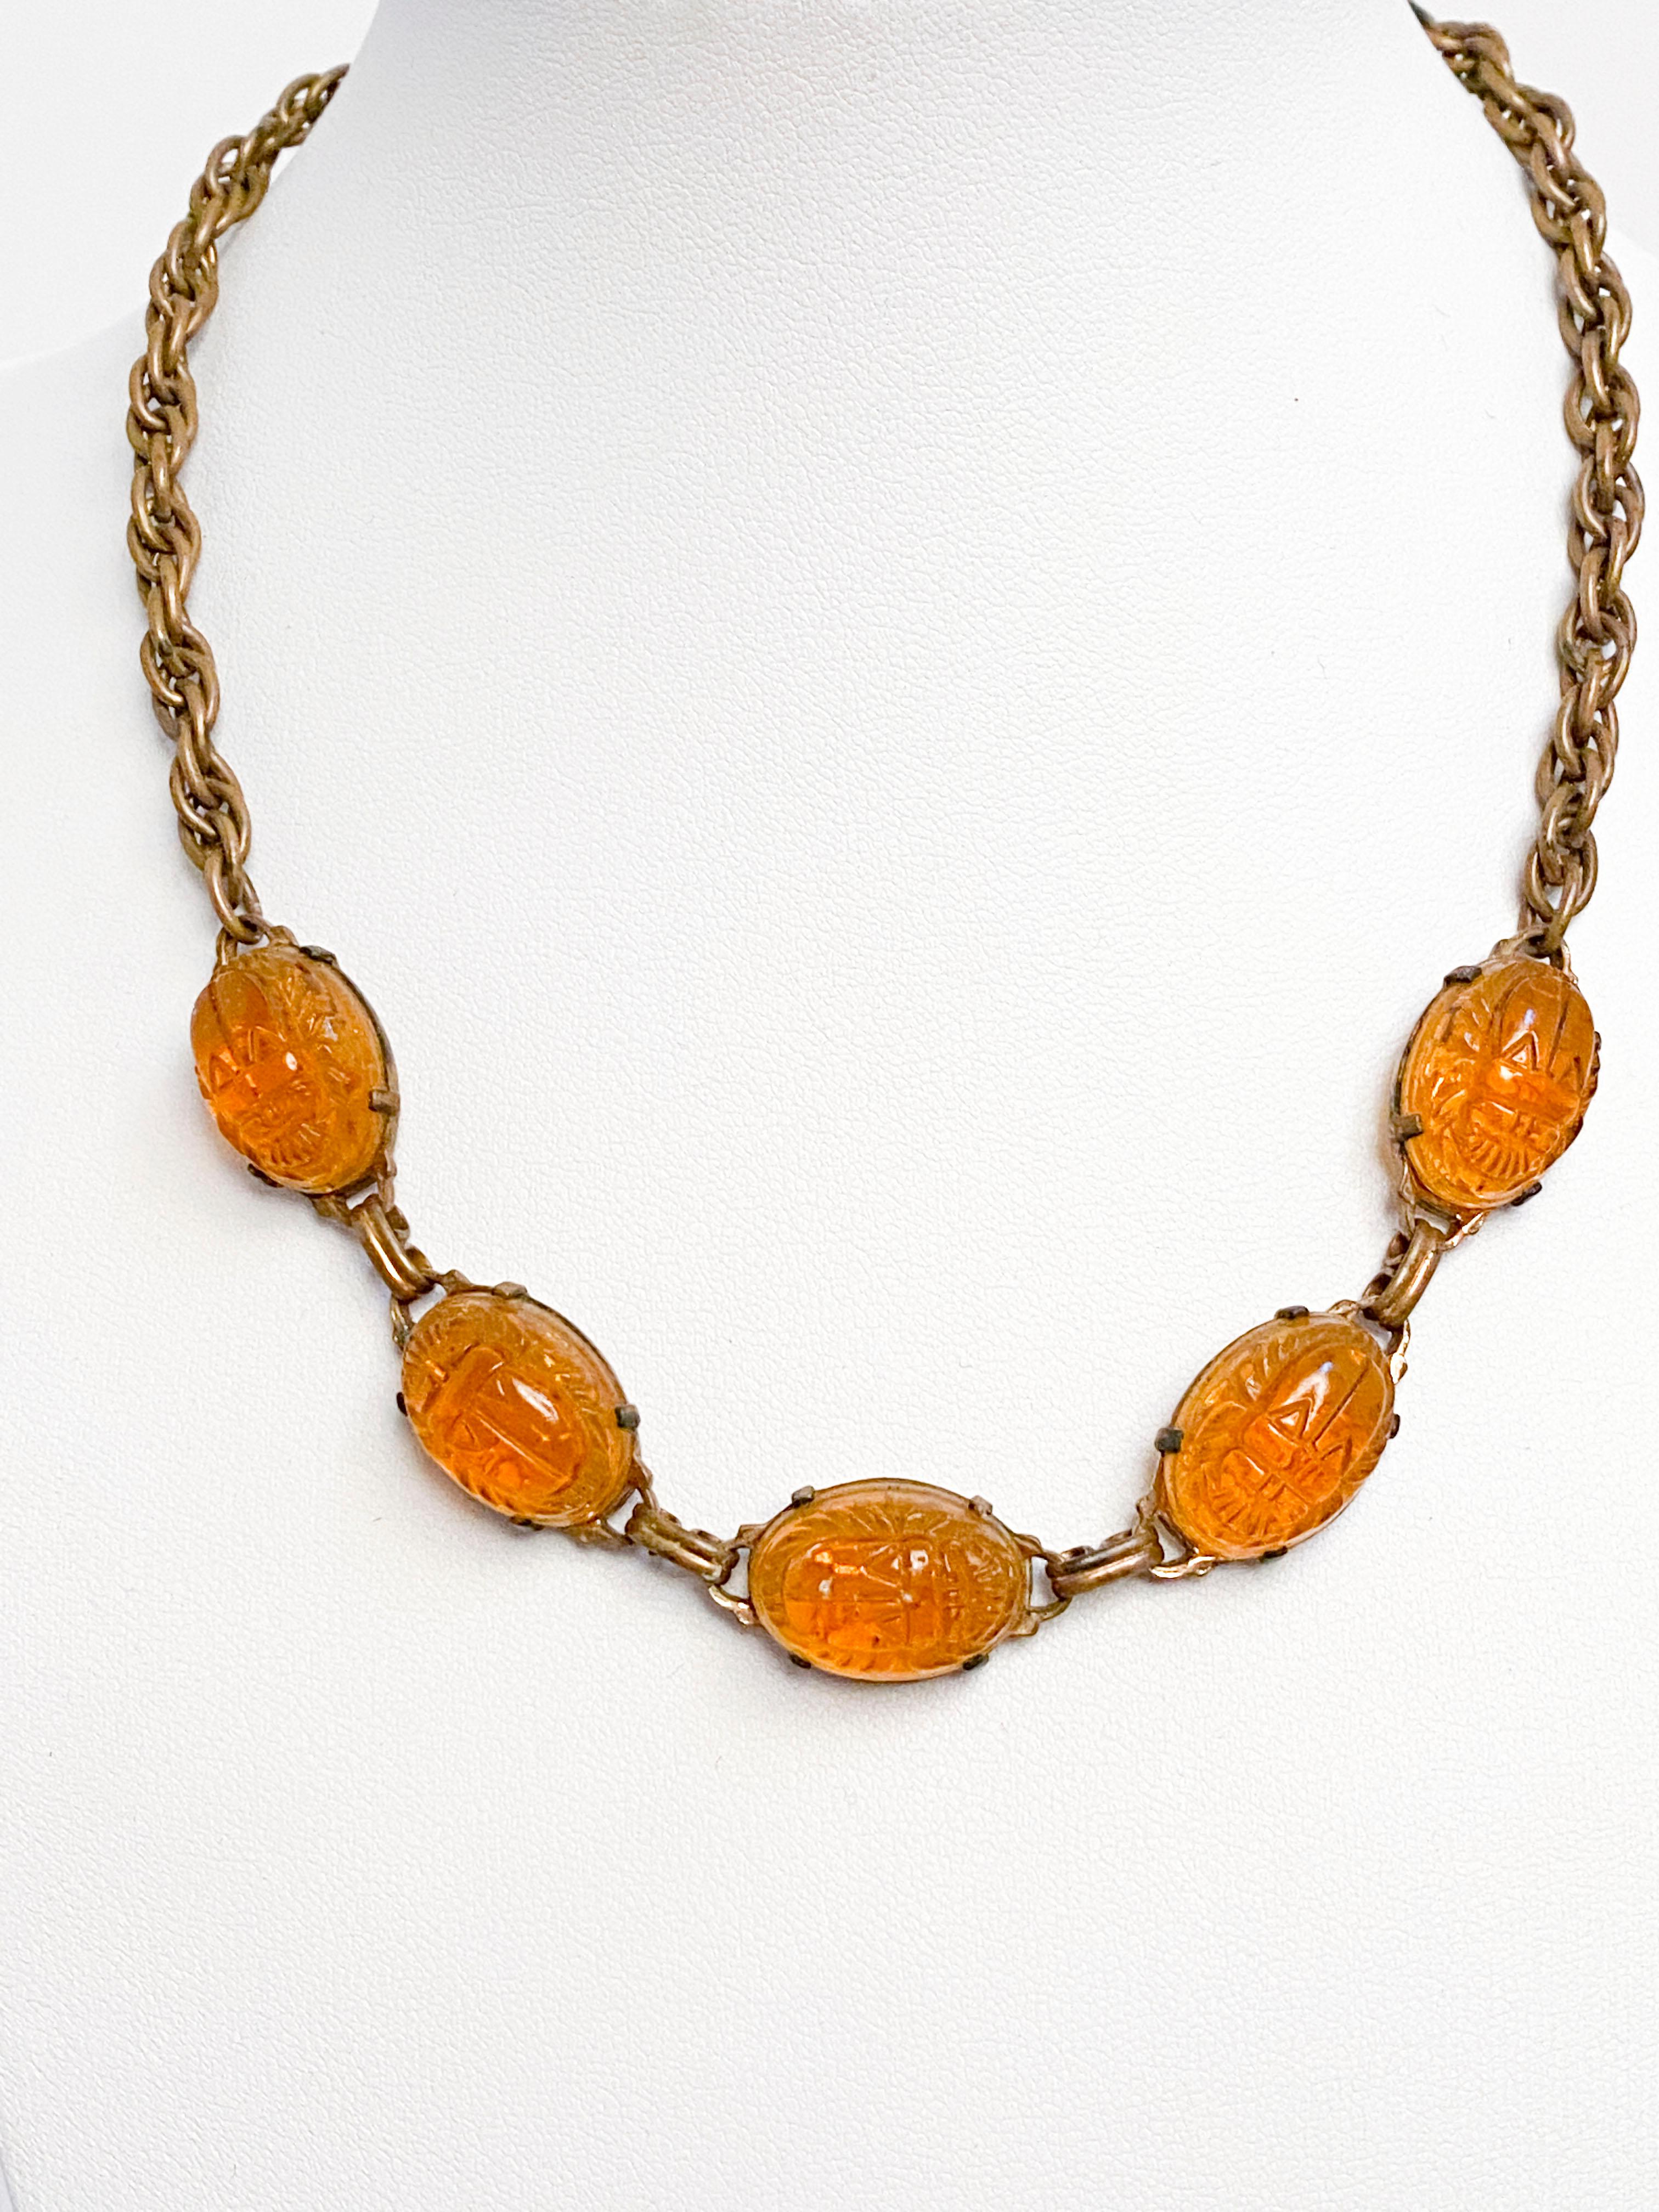 Art Deco 1920s Egyptian Revival Art Glass Scarab Necklace